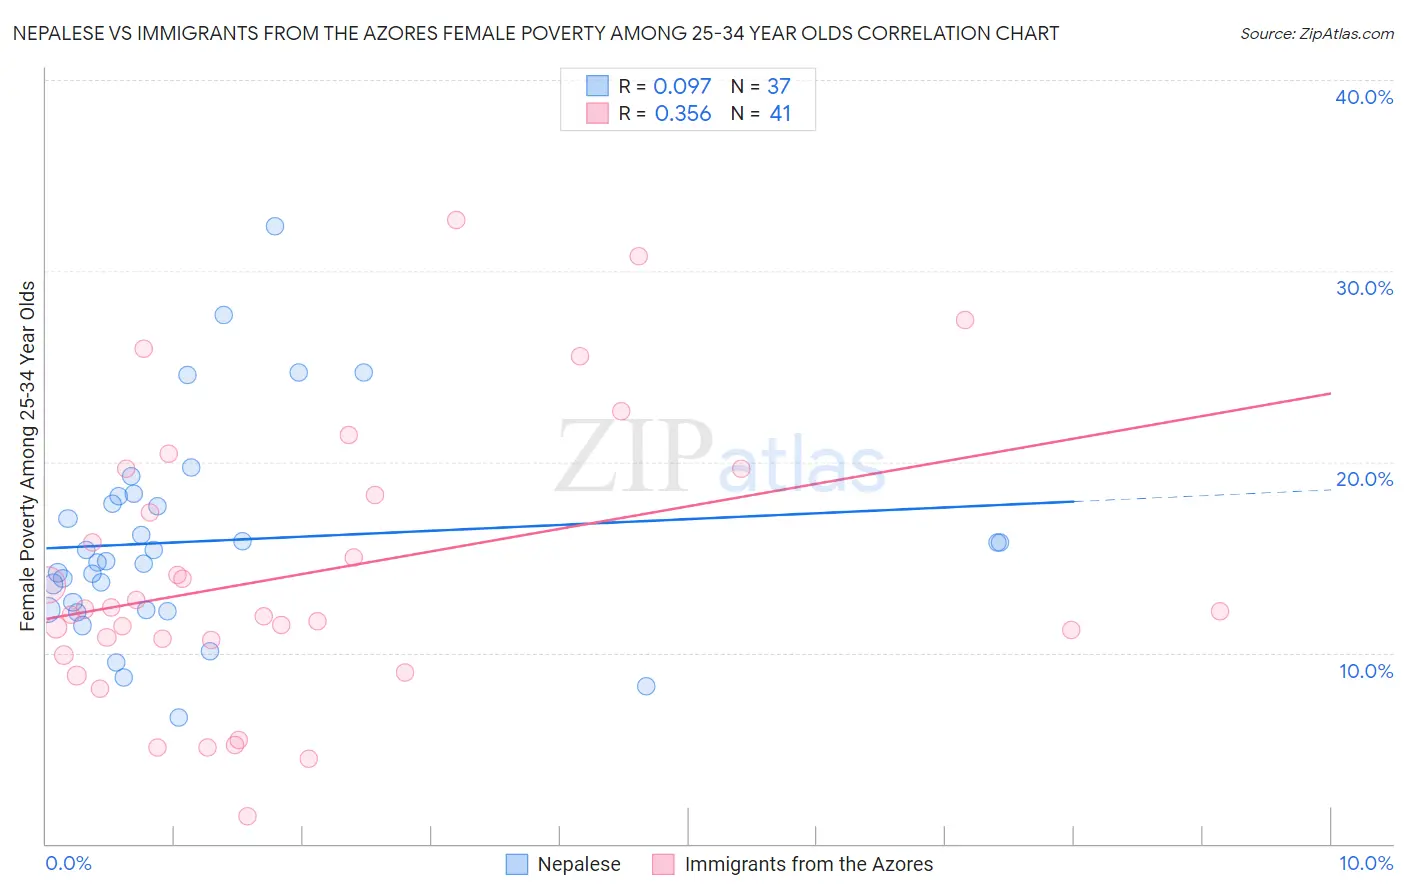 Nepalese vs Immigrants from the Azores Female Poverty Among 25-34 Year Olds